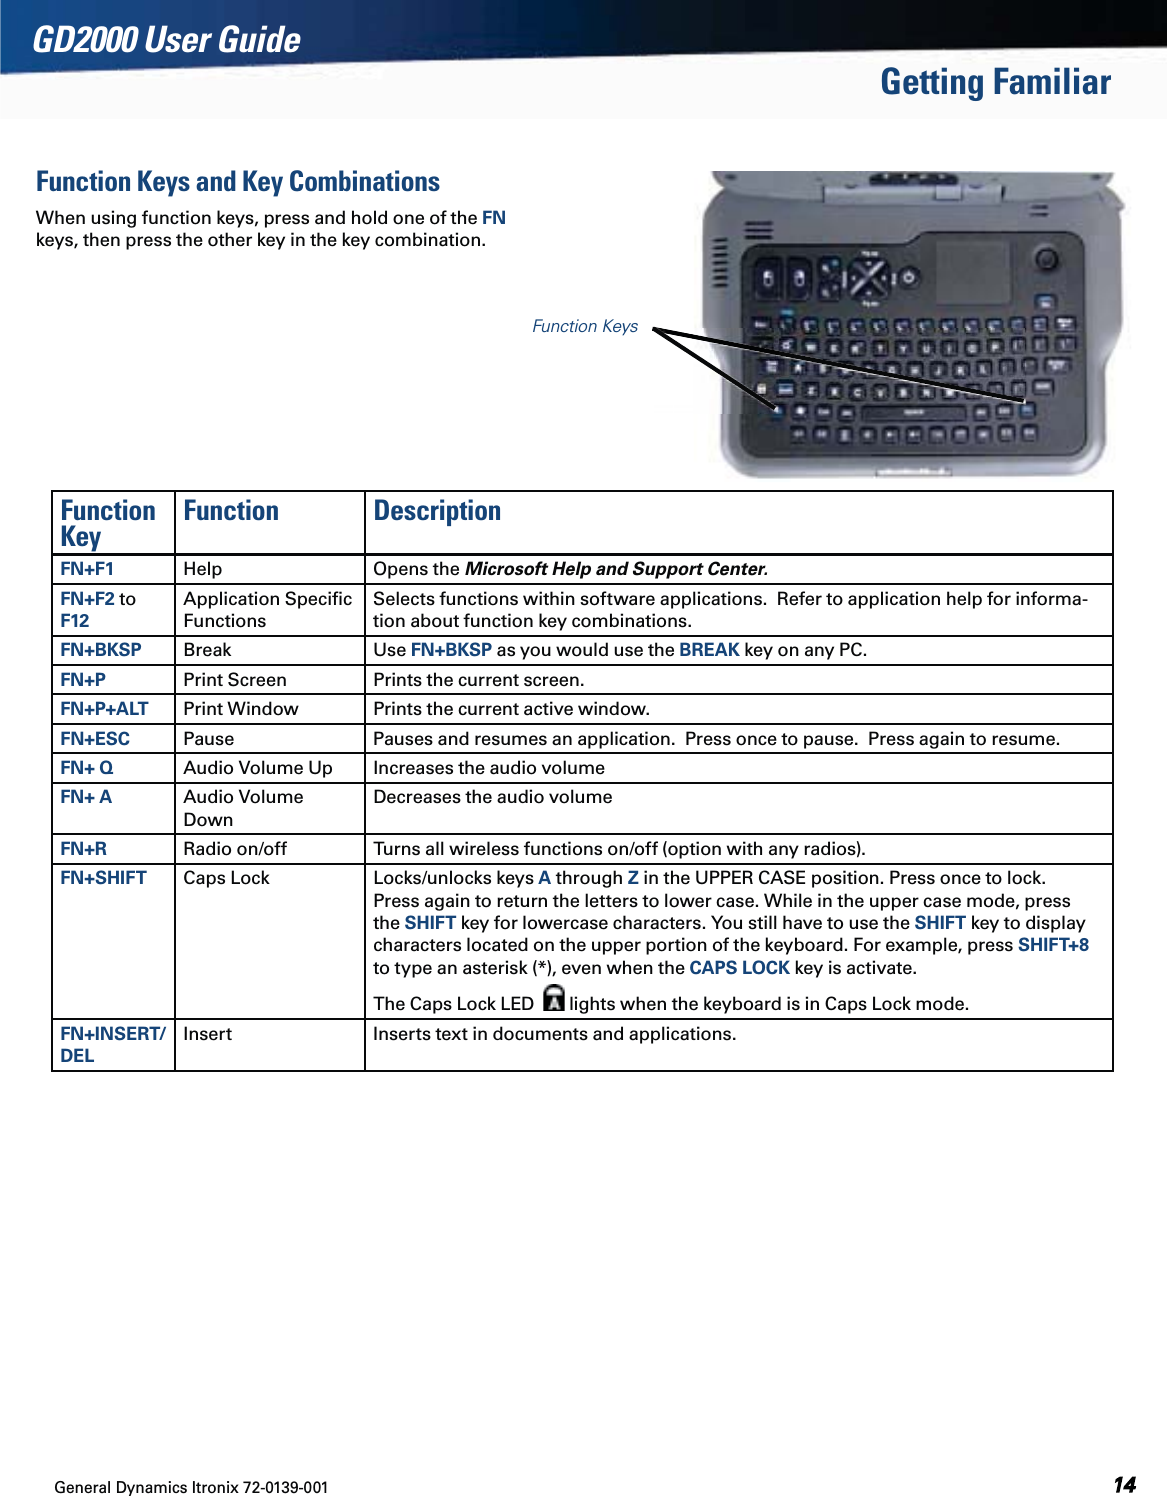 General Dynamics Itronix 72-0139-001  GD2000 User GuideGetting FamiliarFunction Keys and Key CombinationsWhen using function keys, press and hold one of the FN keys, then press the other key in the key combination. Function Key Function DescriptionFN+F1 Help Opens the Microsoft Help and Support Center.FN+F2 to F12Application Speciﬁc FunctionsSelects functions within software applications.  Refer to application help for informa-tion about function key combinations.FN+BKSP Break Use FN+BKSP as you would use the BREAK key on any PC.FN+P Print Screen Prints the current screen.  FN+P+ALT Print Window Prints the current active window.FN+ESC Pause Pauses and resumes an application.  Press once to pause.  Press again to resume.FN+ Q Audio Volume Up Increases the audio volumeFN+ A Audio Volume DownDecreases the audio volumeFN+R  Radio on/off Turns all wireless functions on/off (option with any radios).FN+SHIFT  Caps Lock  Locks/unlocks keys A through Z in the UPPER CASE position. Press once to lock.  Press again to return the letters to lower case. While in the upper case mode, press the SHIFT key for lowercase characters. You still have to use the SHIFT key to display characters located on the upper portion of the keyboard. For example, press SHIFT+8 to type an asterisk (*), even when the CAPS LOCK key is activate.The Caps Lock LED    lights when the keyboard is in Caps Lock mode.FN+INSERT/DELInsert Inserts text in documents and applications.Function Keys